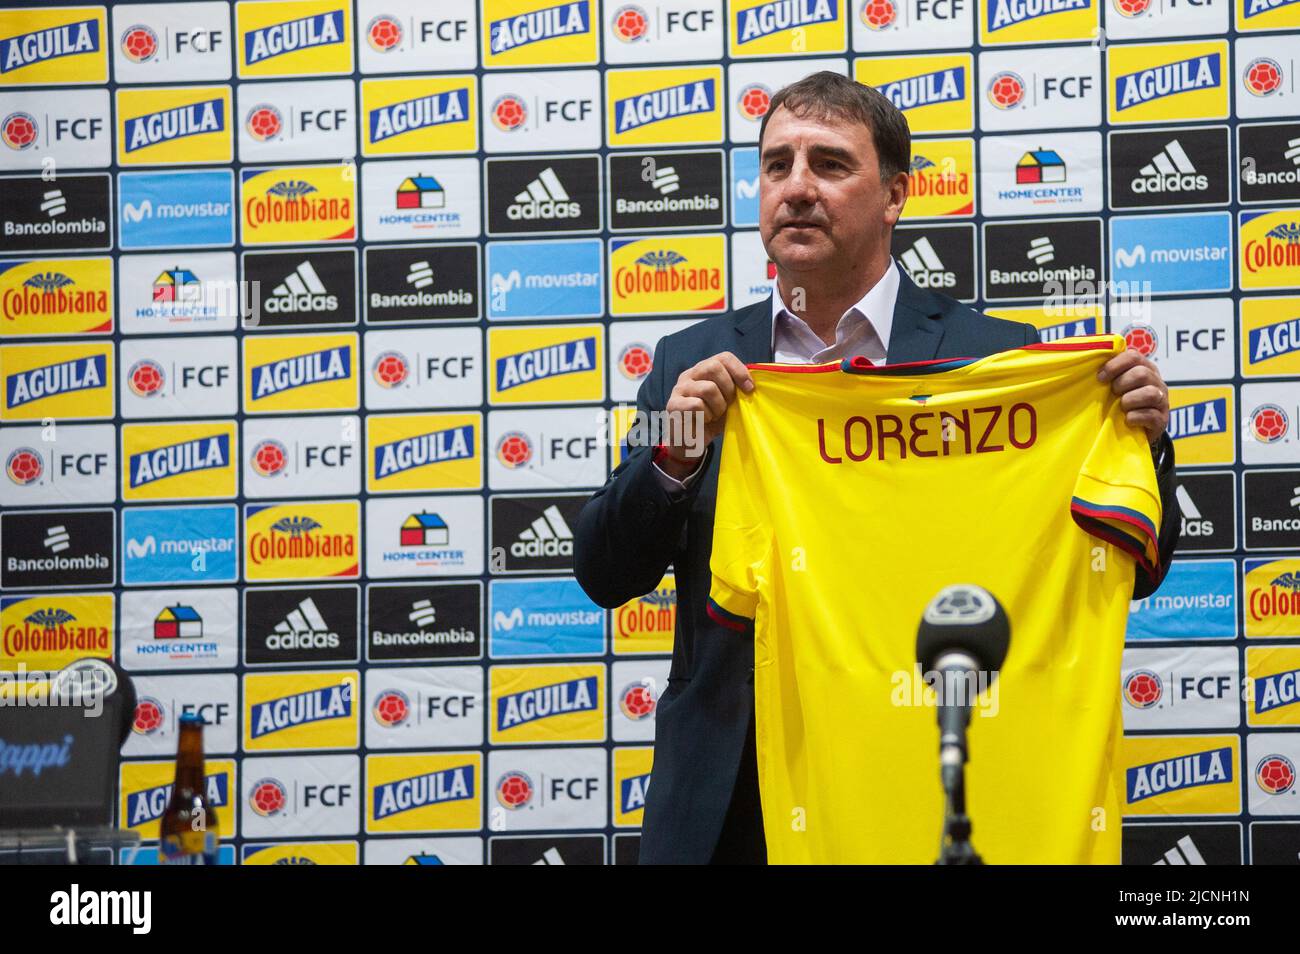 Bogota, Colombia June 14, 2022, Colombia's federation of football soccer team unveils its new coach in replacement of Reinaldo Rueda in a press conference with new coach Nestor Lorenzo presented by Colombia's soccer team president Ramon Jesurun in Bogota, Colombia June 14, 2022. Photo by: Chepa Beltran/Long Visual Press Stock Photo